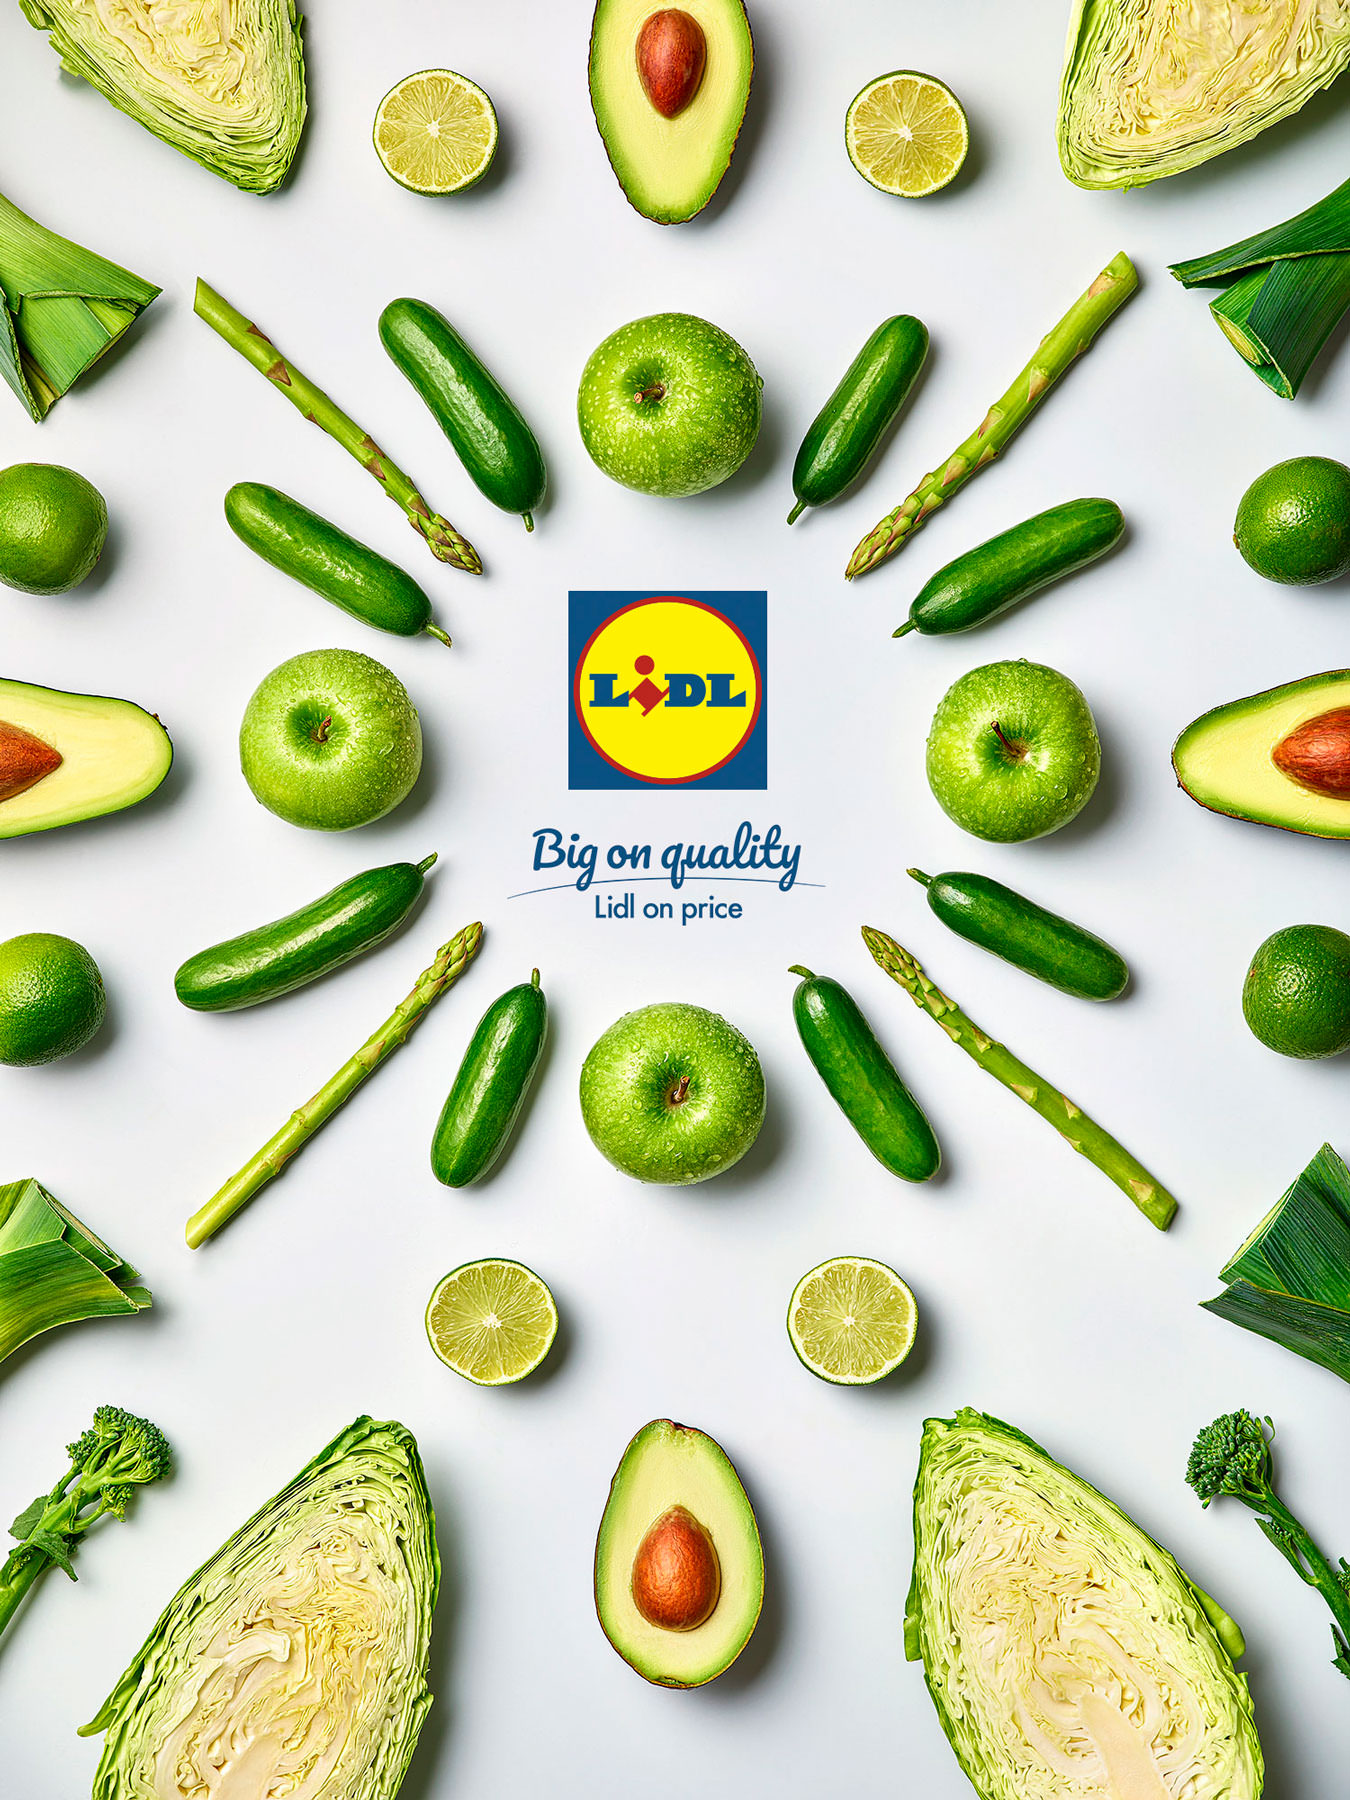 Green fruit and vegetables graphically arranged with Lidl logo in the middle - London Food & Drinks Photographer